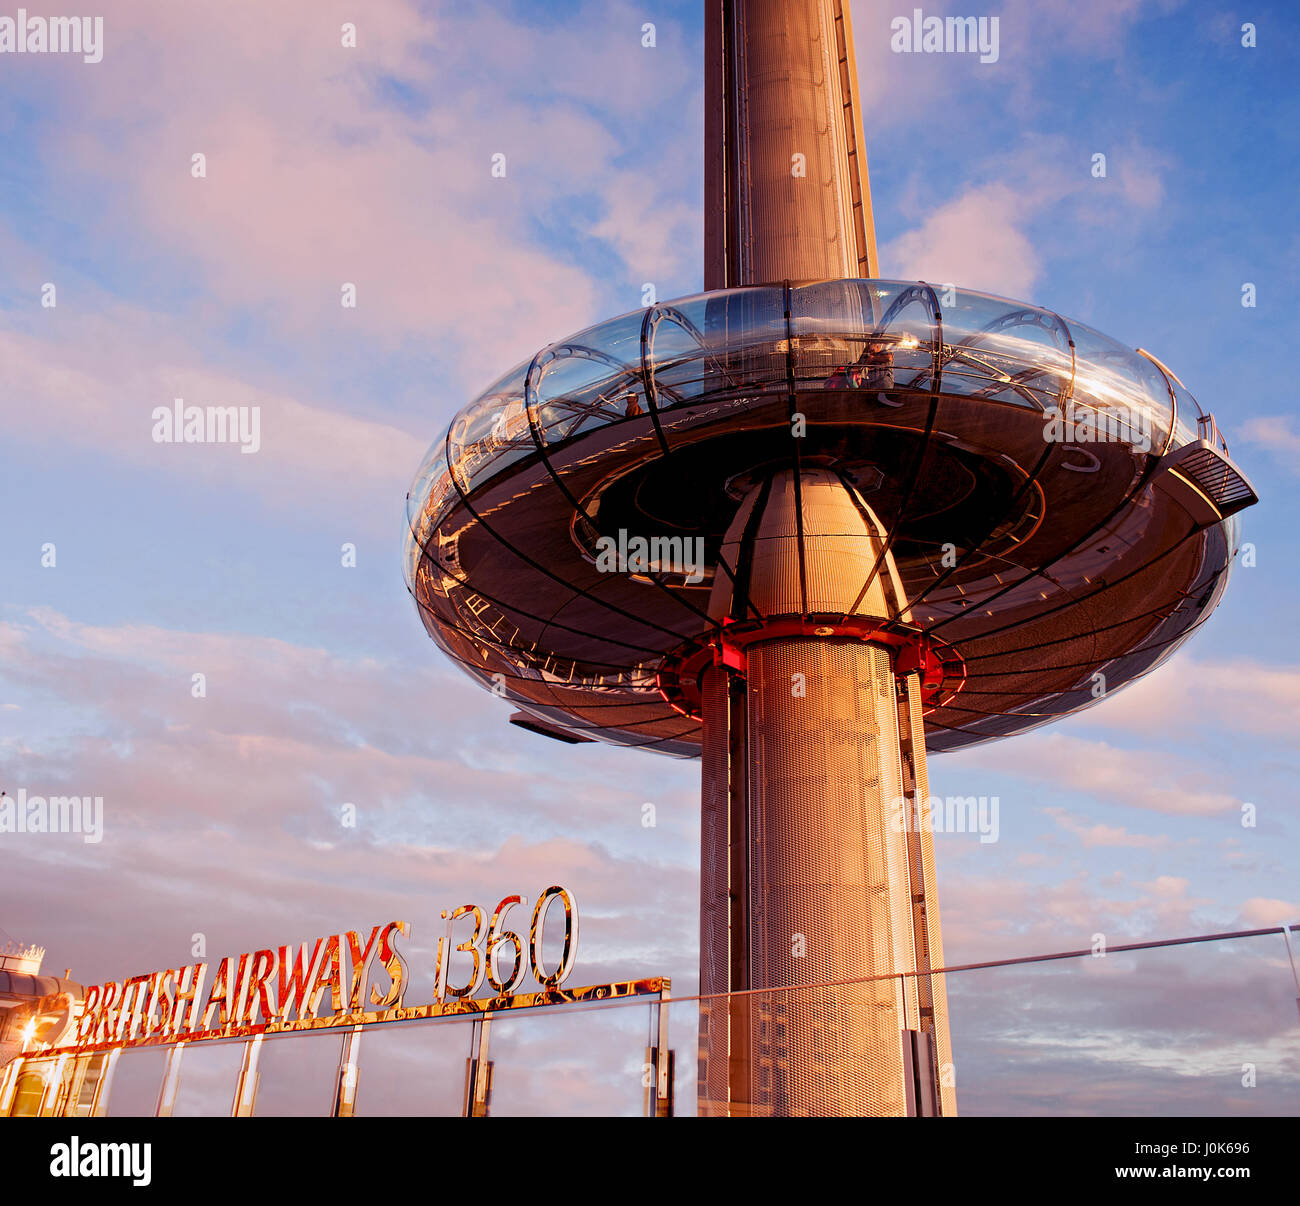 Brighton's i360, the world's tallest moving observation tower, opened in 2016 offering visitors 360 degree views over the Sussex coast in England. Stock Photo